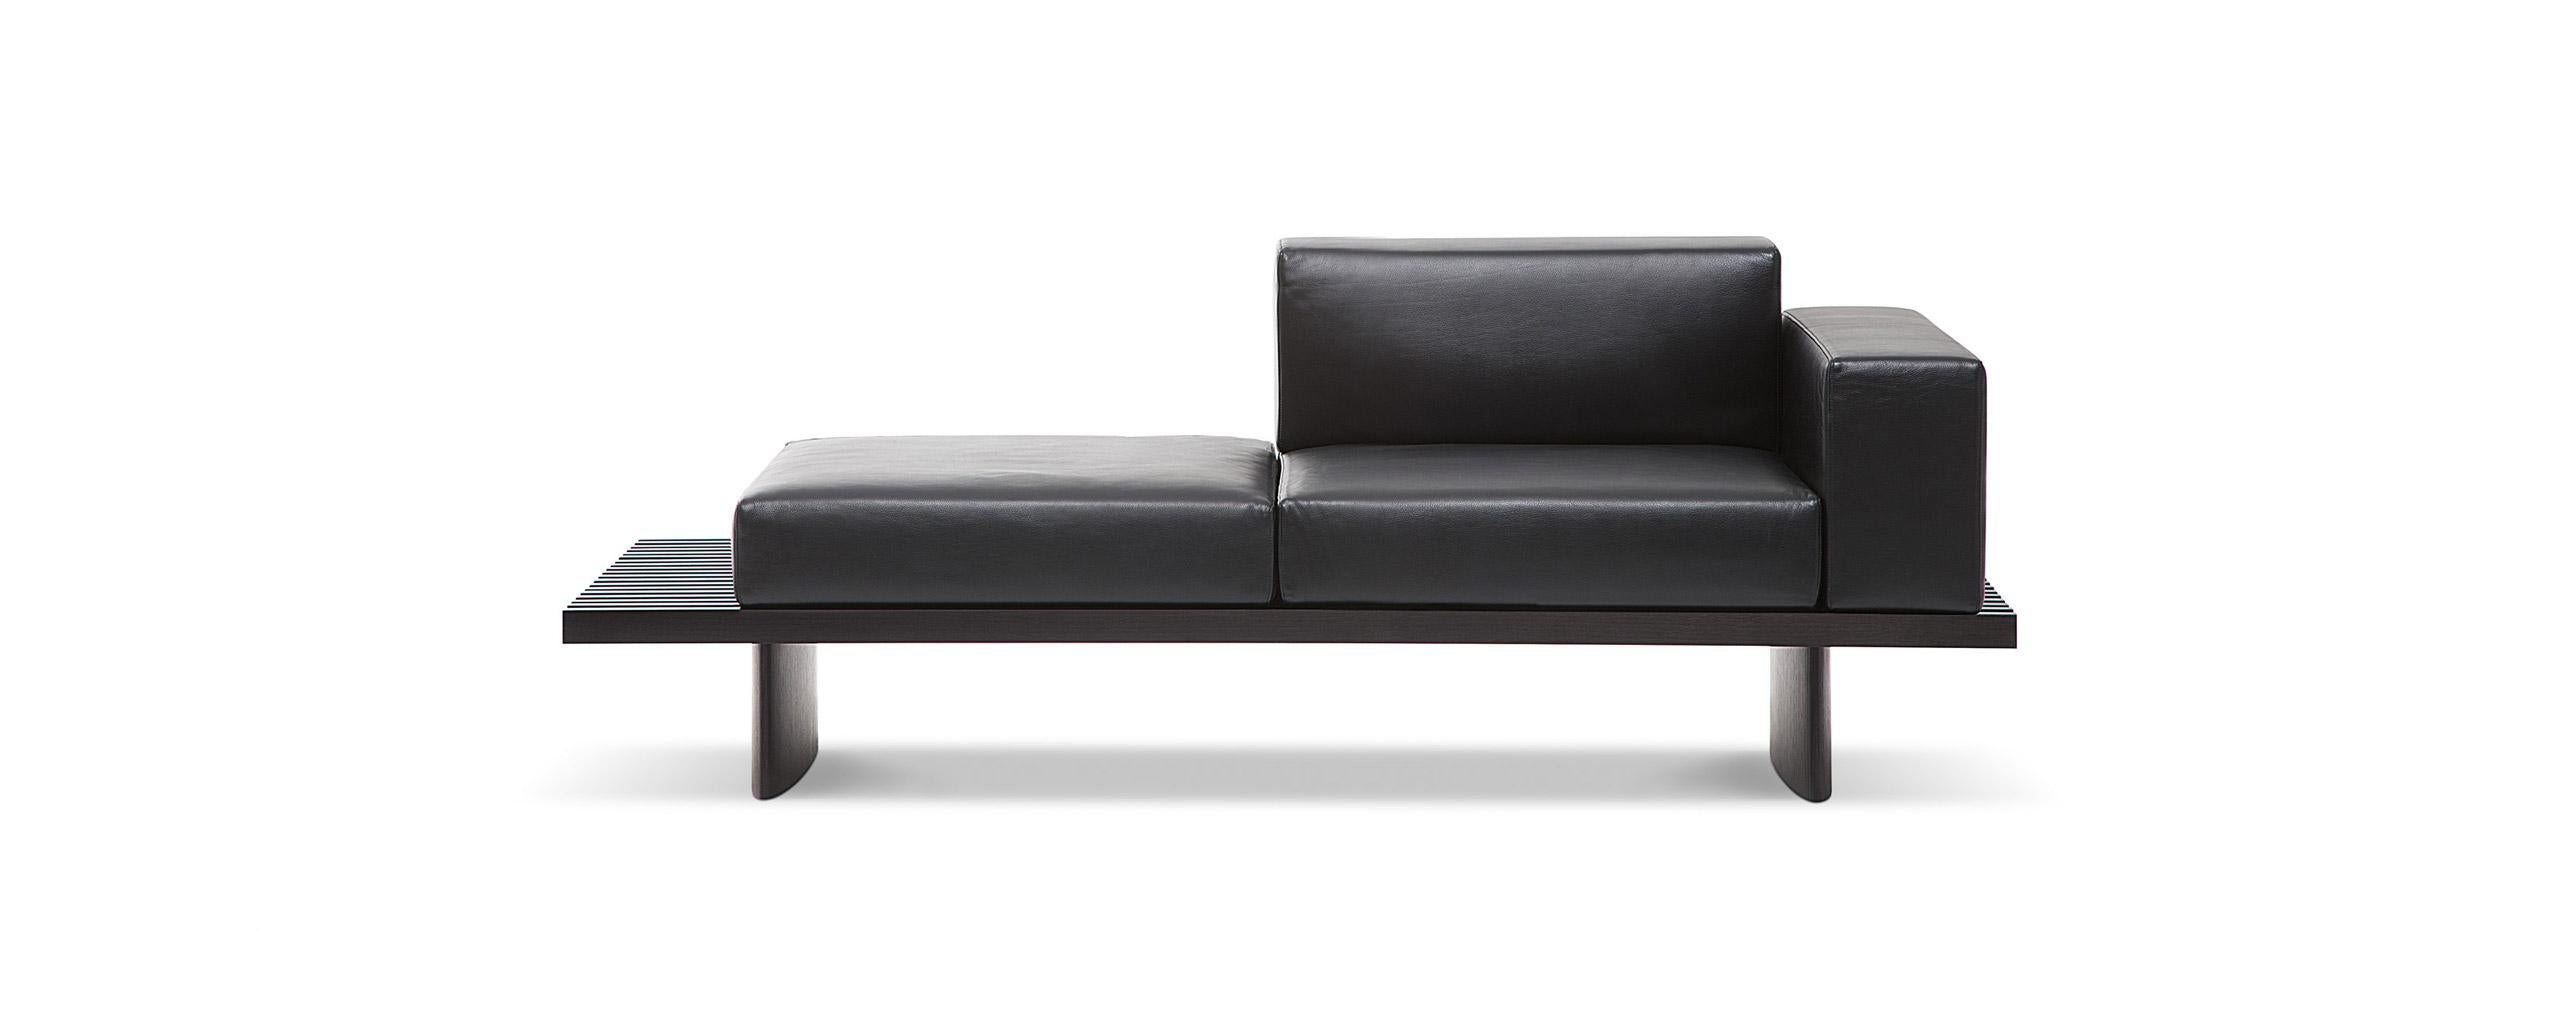 Italian Charlotte Perriand Refolo Modular Sofa, Wood and Black Leather by Cassina For Sale